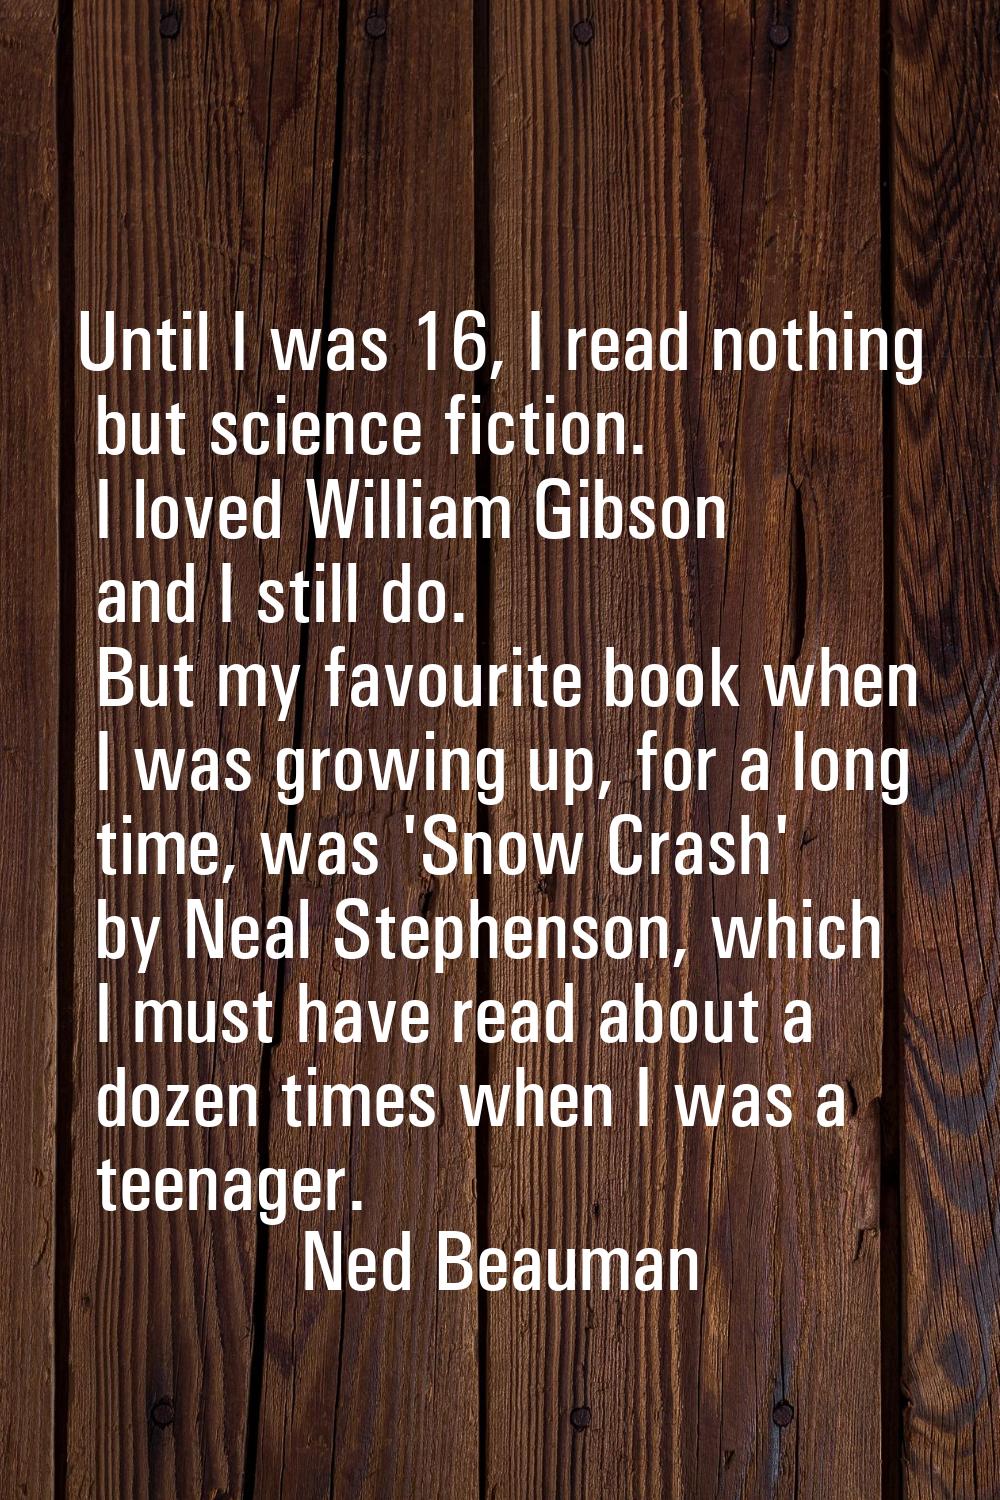 Until I was 16, I read nothing but science fiction. I loved William Gibson and I still do. But my f